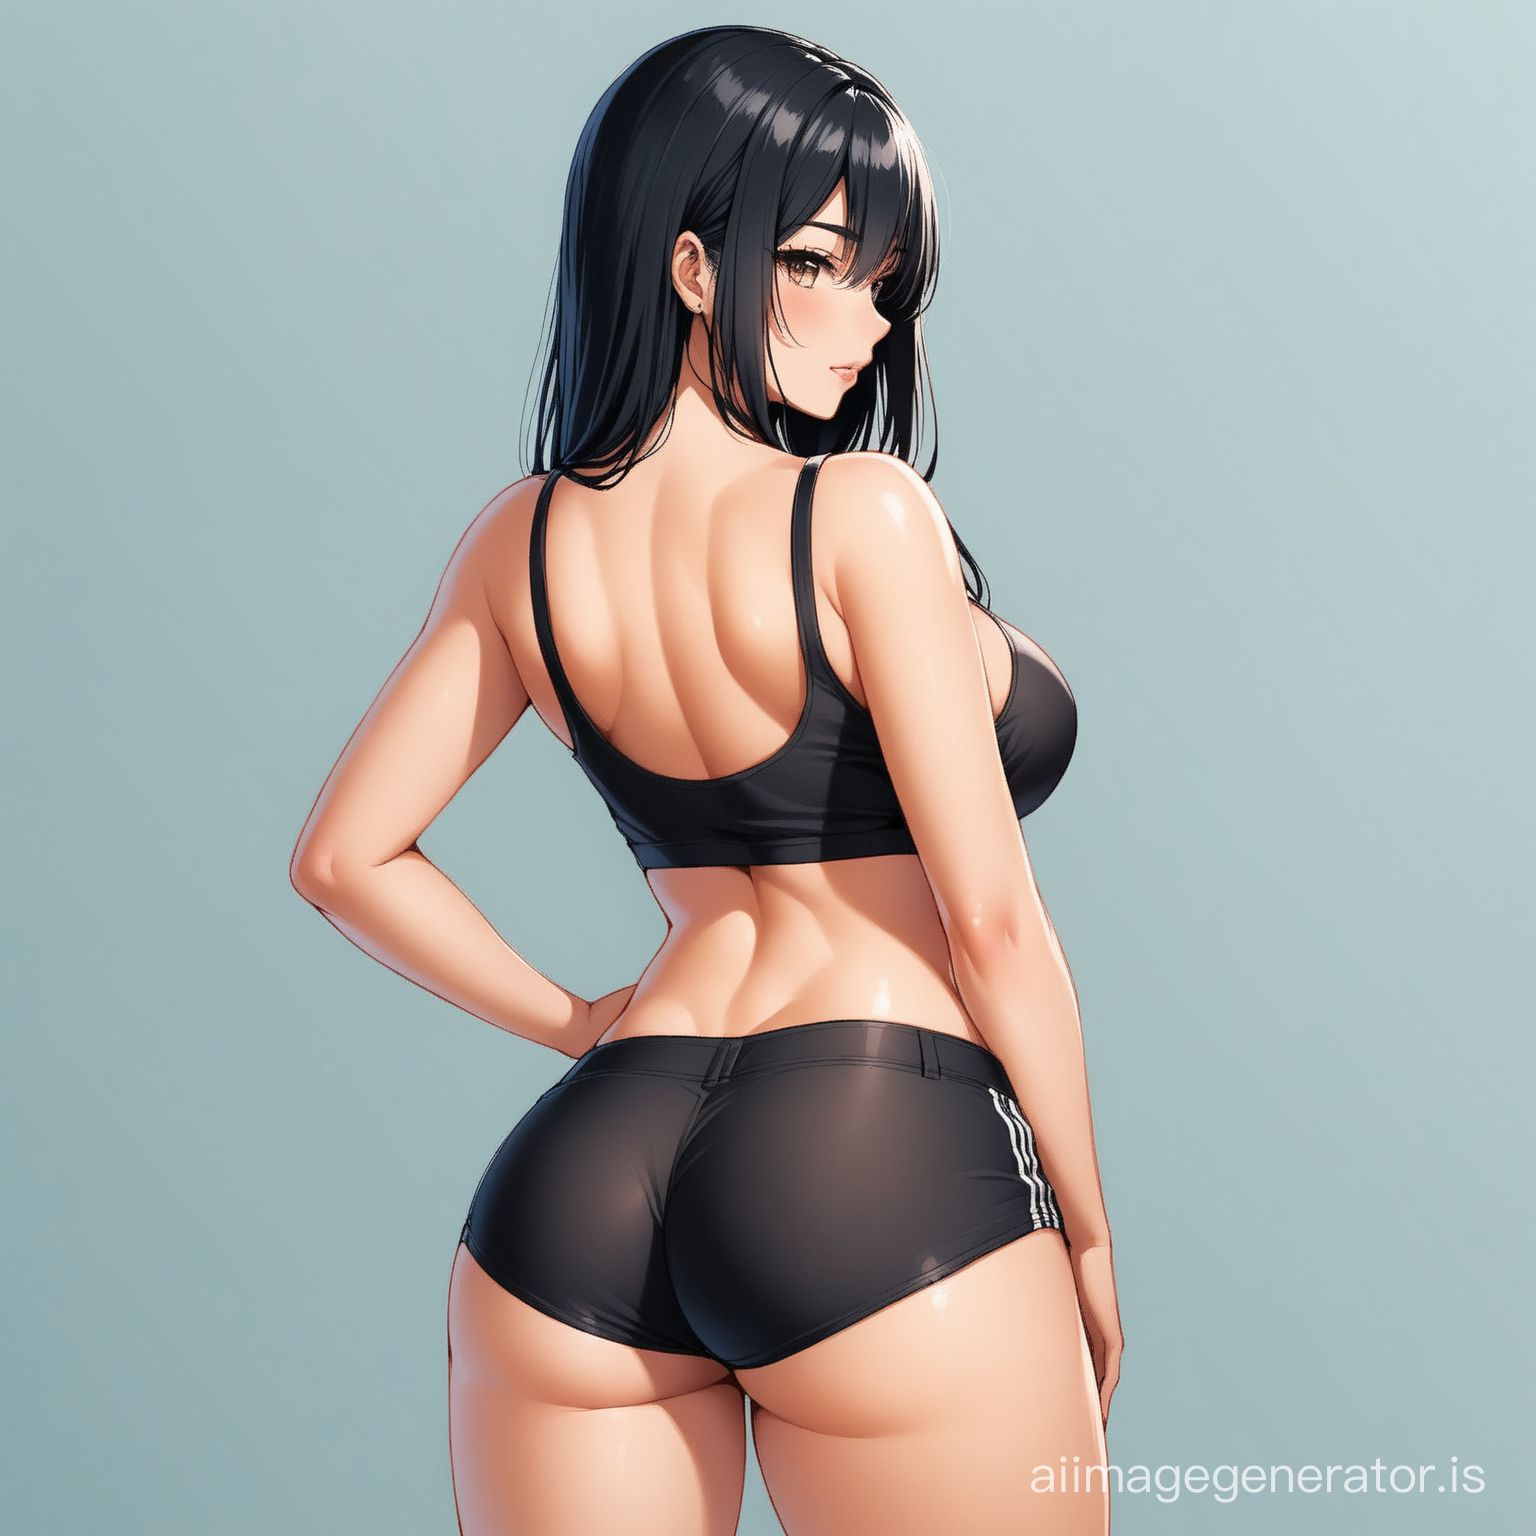 Girl with black hair and big tits wearing booty shorts 